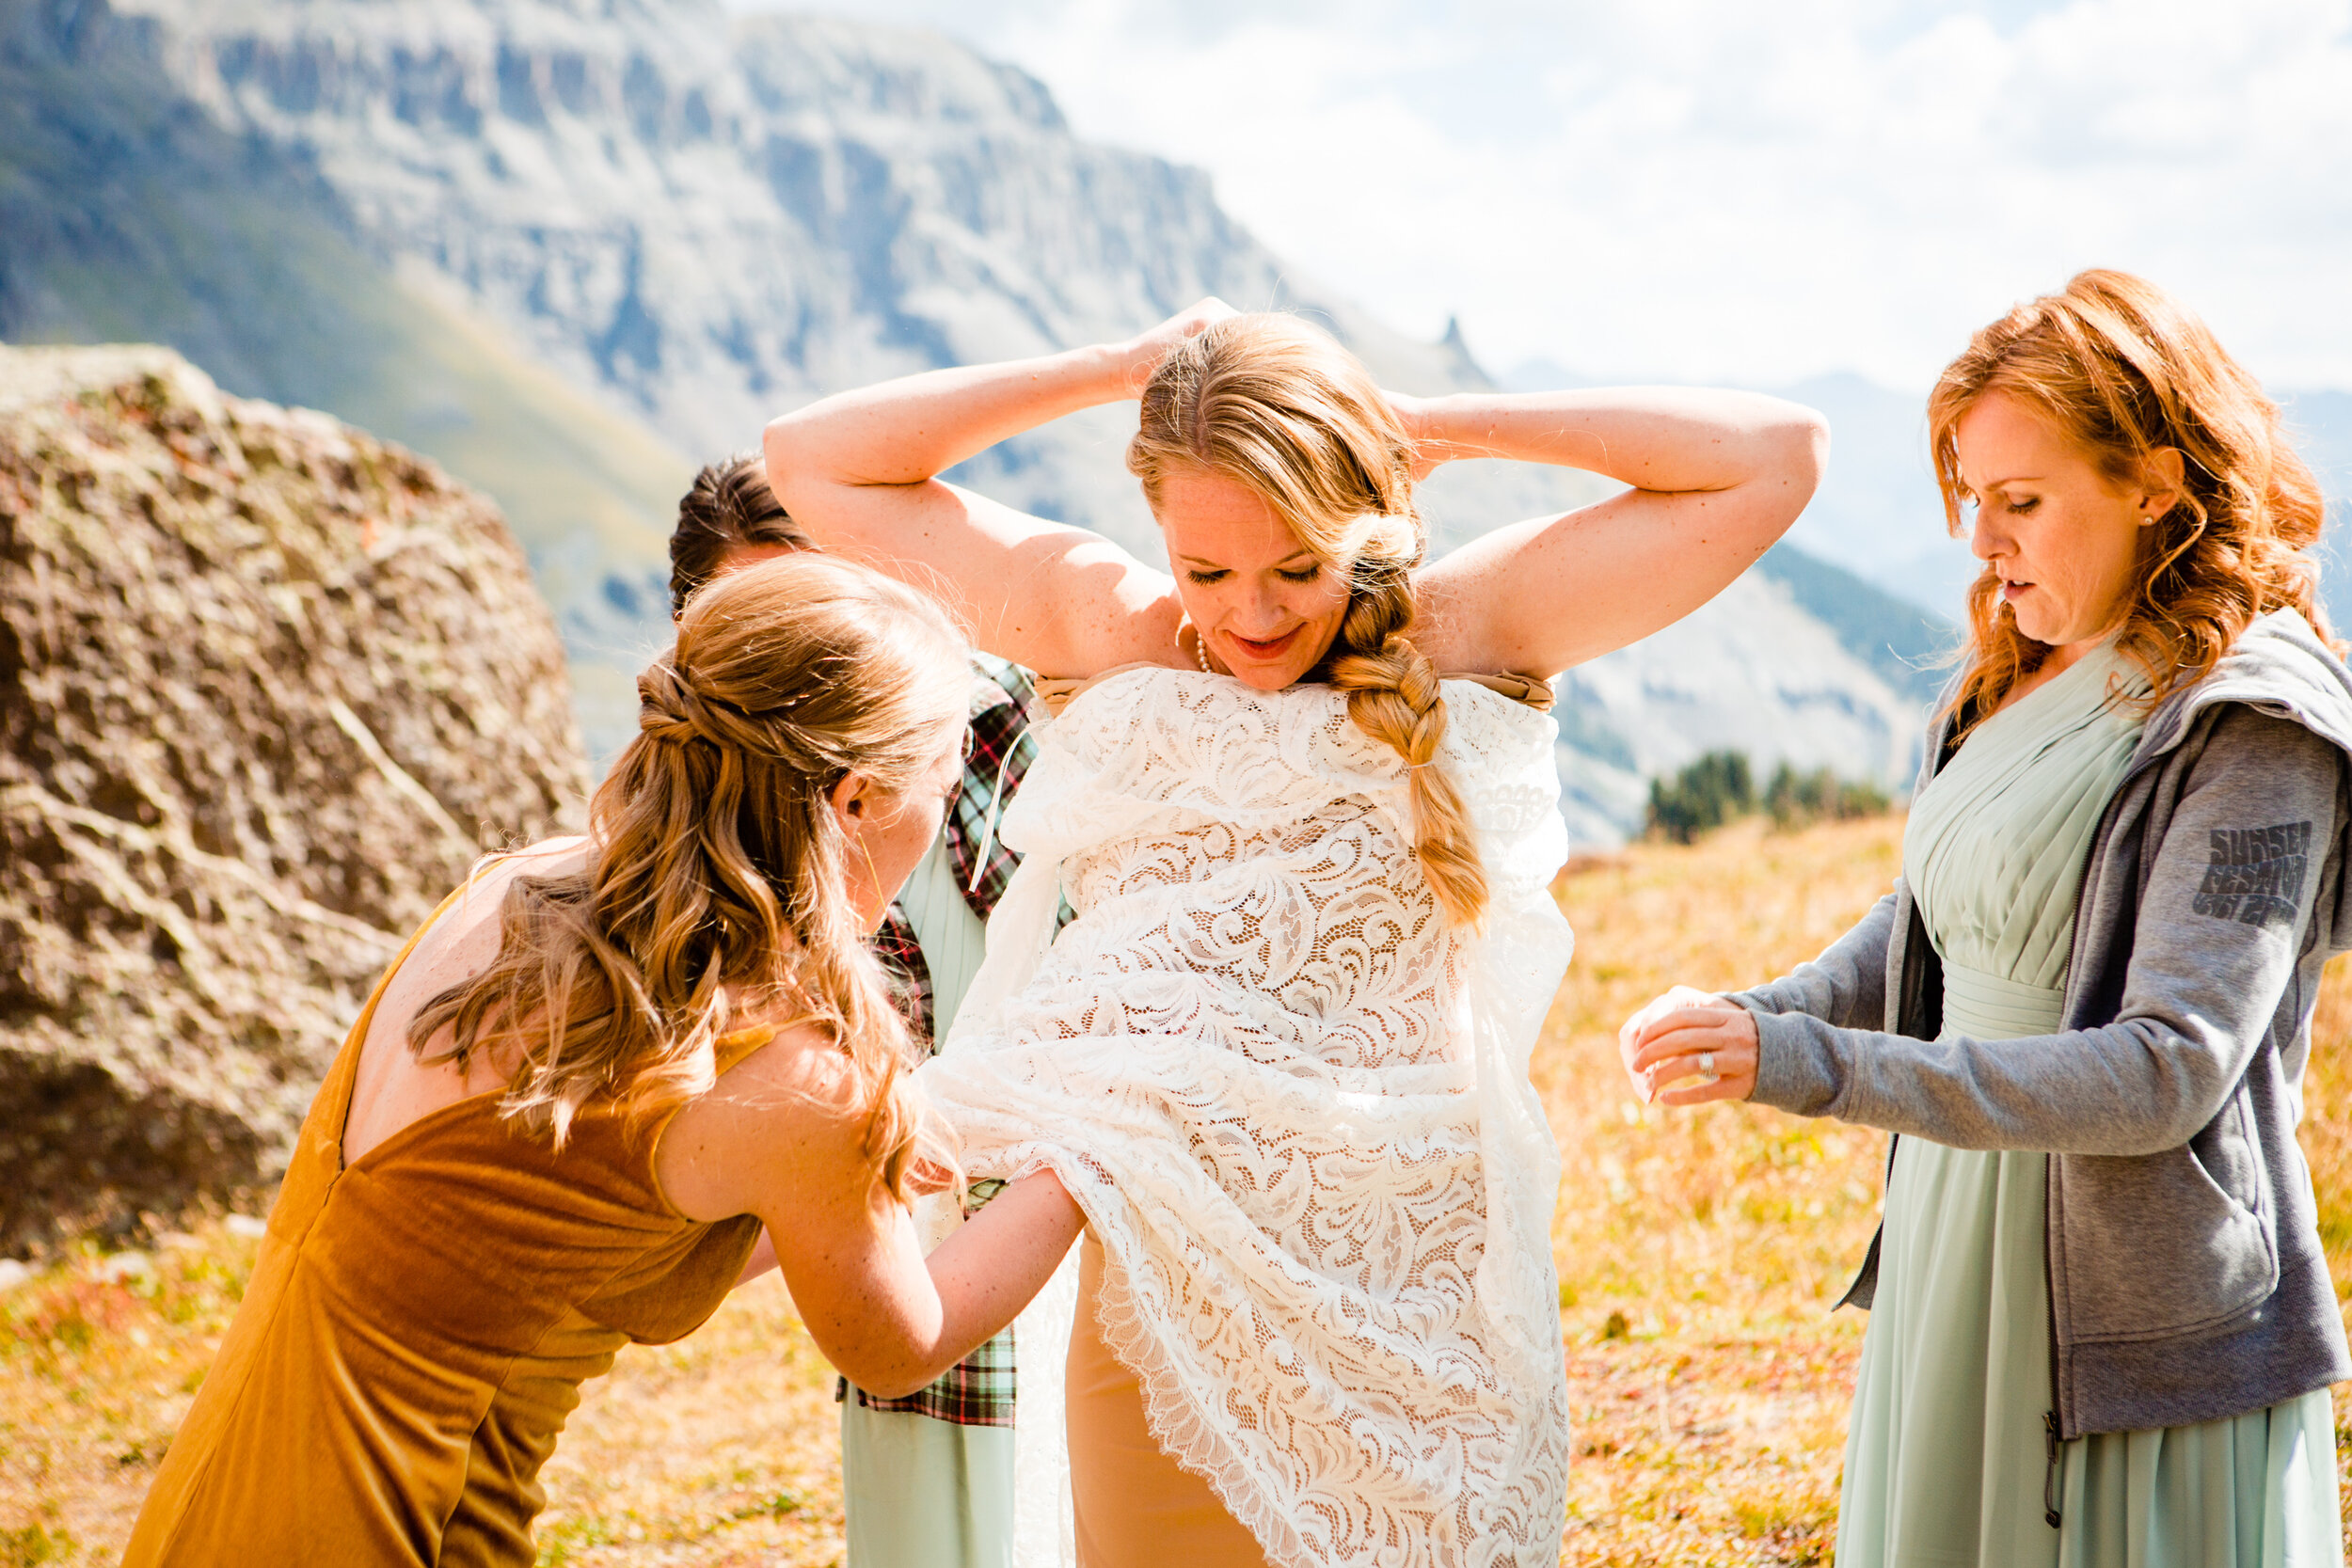  ©Alexi Hubbell Photography 2021  Governor Basin  Jeep wedding  Bride putting on dress outdoors, hikinkg 